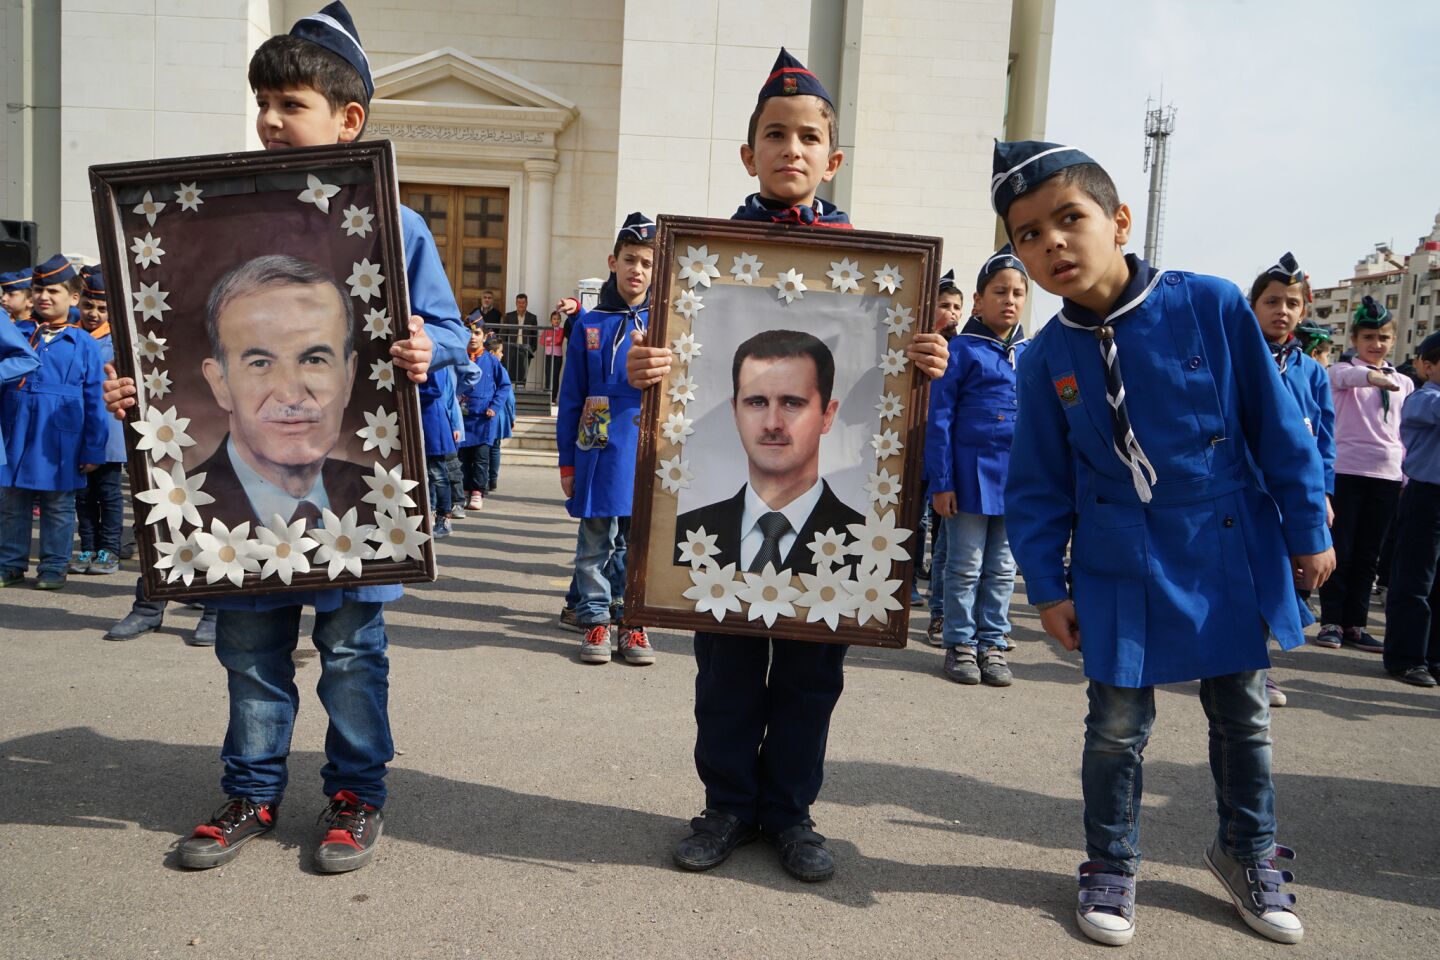 Elementary school children hold portraits of Syrian President Bashar Assad, right, and his late father, Hafez.